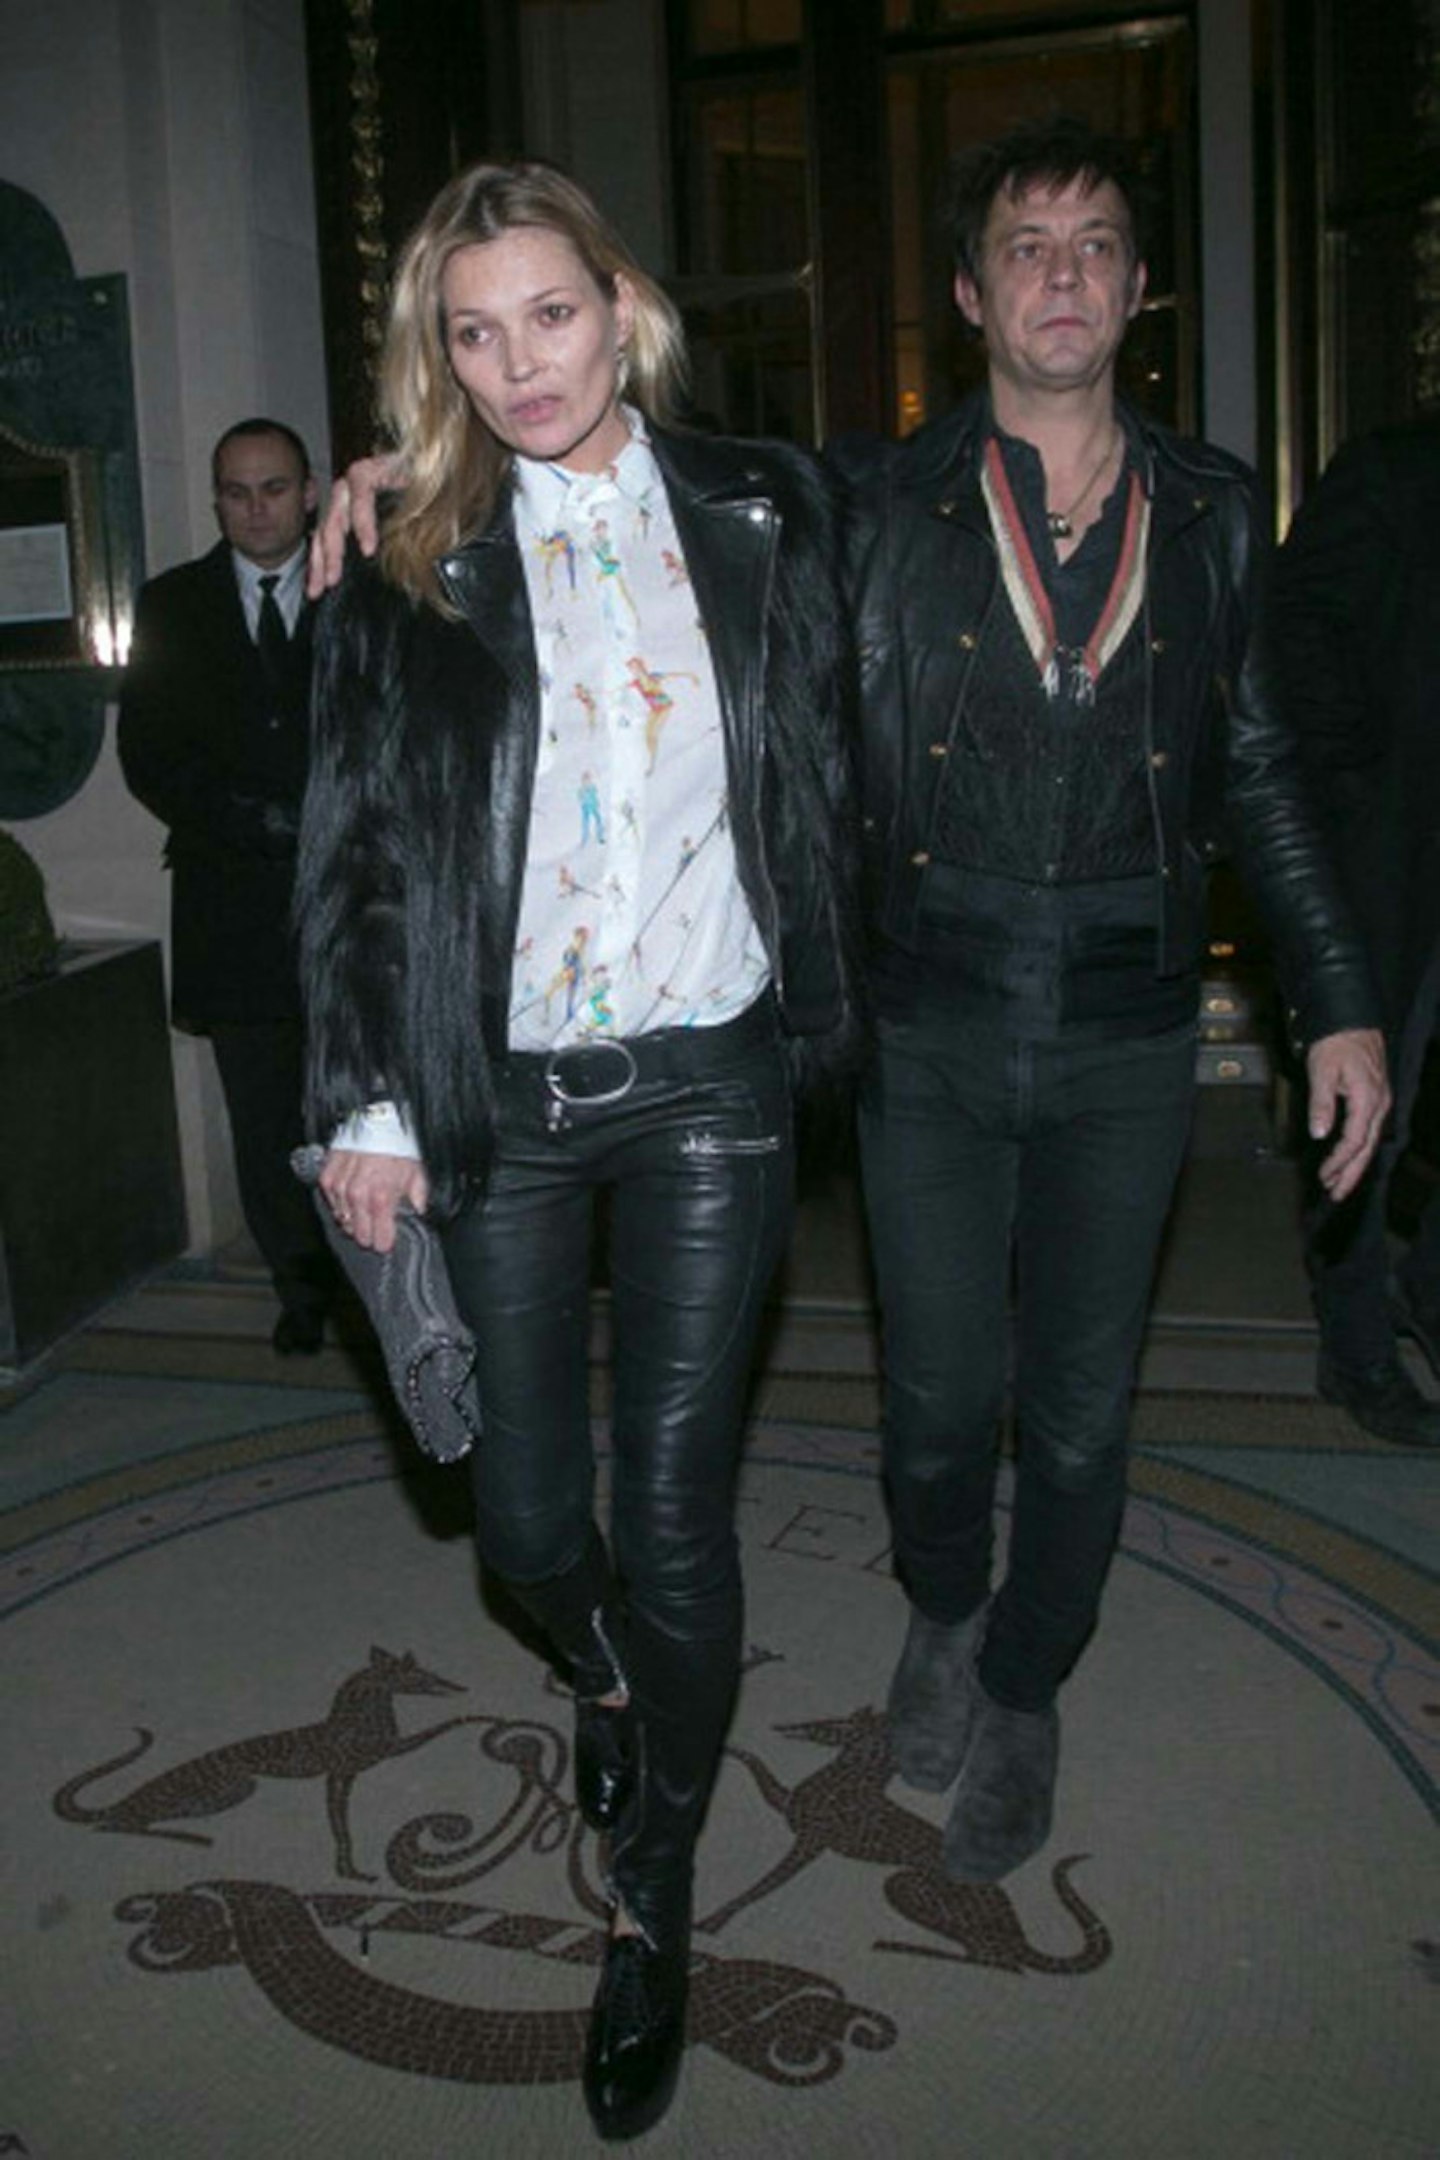 Kate Moss and Jamie Hince leave the Meurice hotel, 1 March 2014